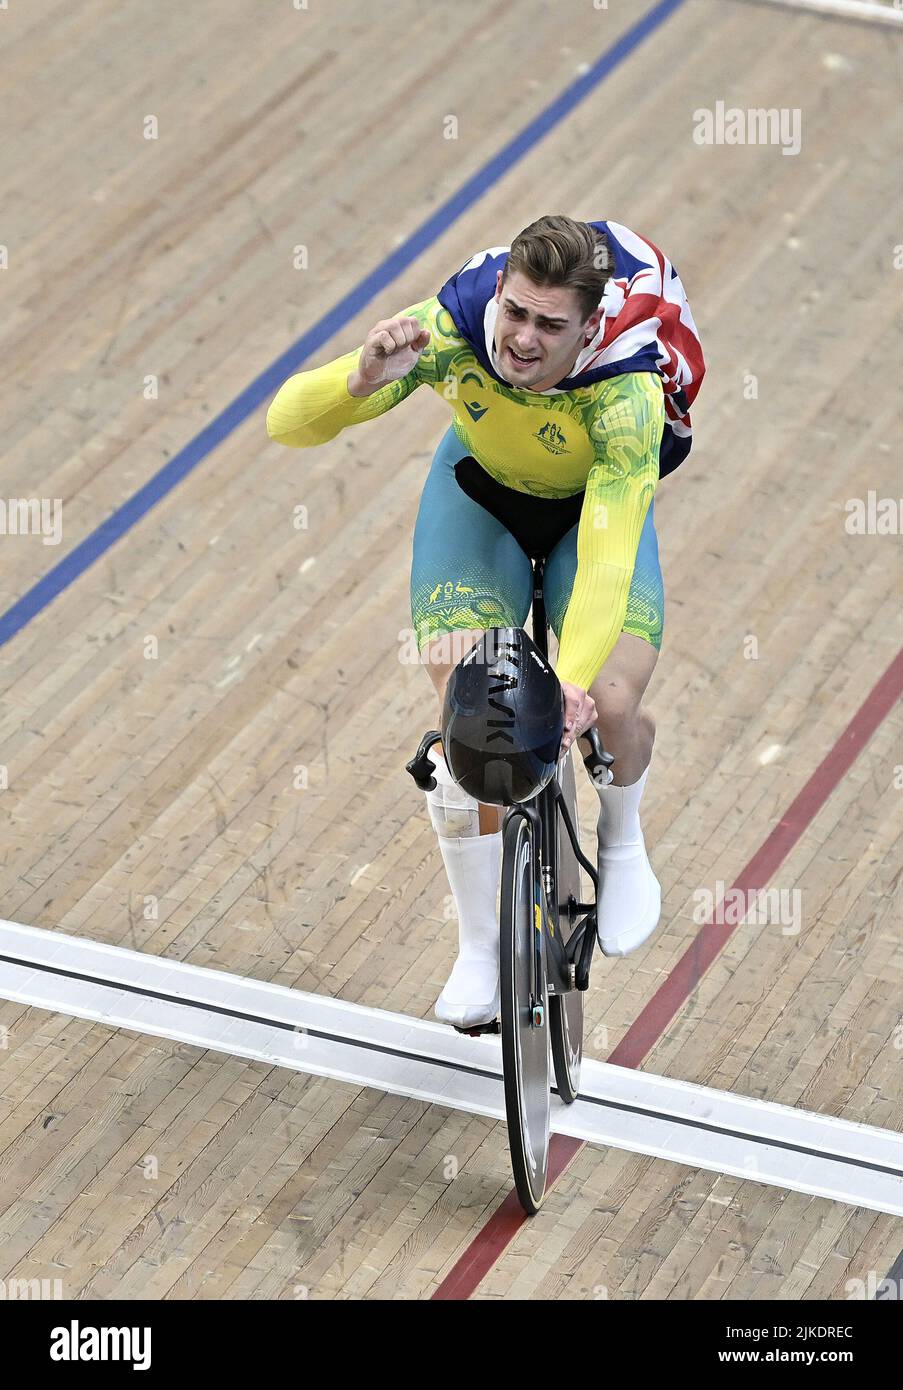 Stratford, United Kingdom. 01st Aug, 2022. Commonwealth Games Track Cycling. Olympic Velodrome. Stratford. Matthew Glaetzer (AUS) celebrates his win during the Mens 1000m Time Trial. Credit: Sport In Pictures/Alamy Live News Stock Photo